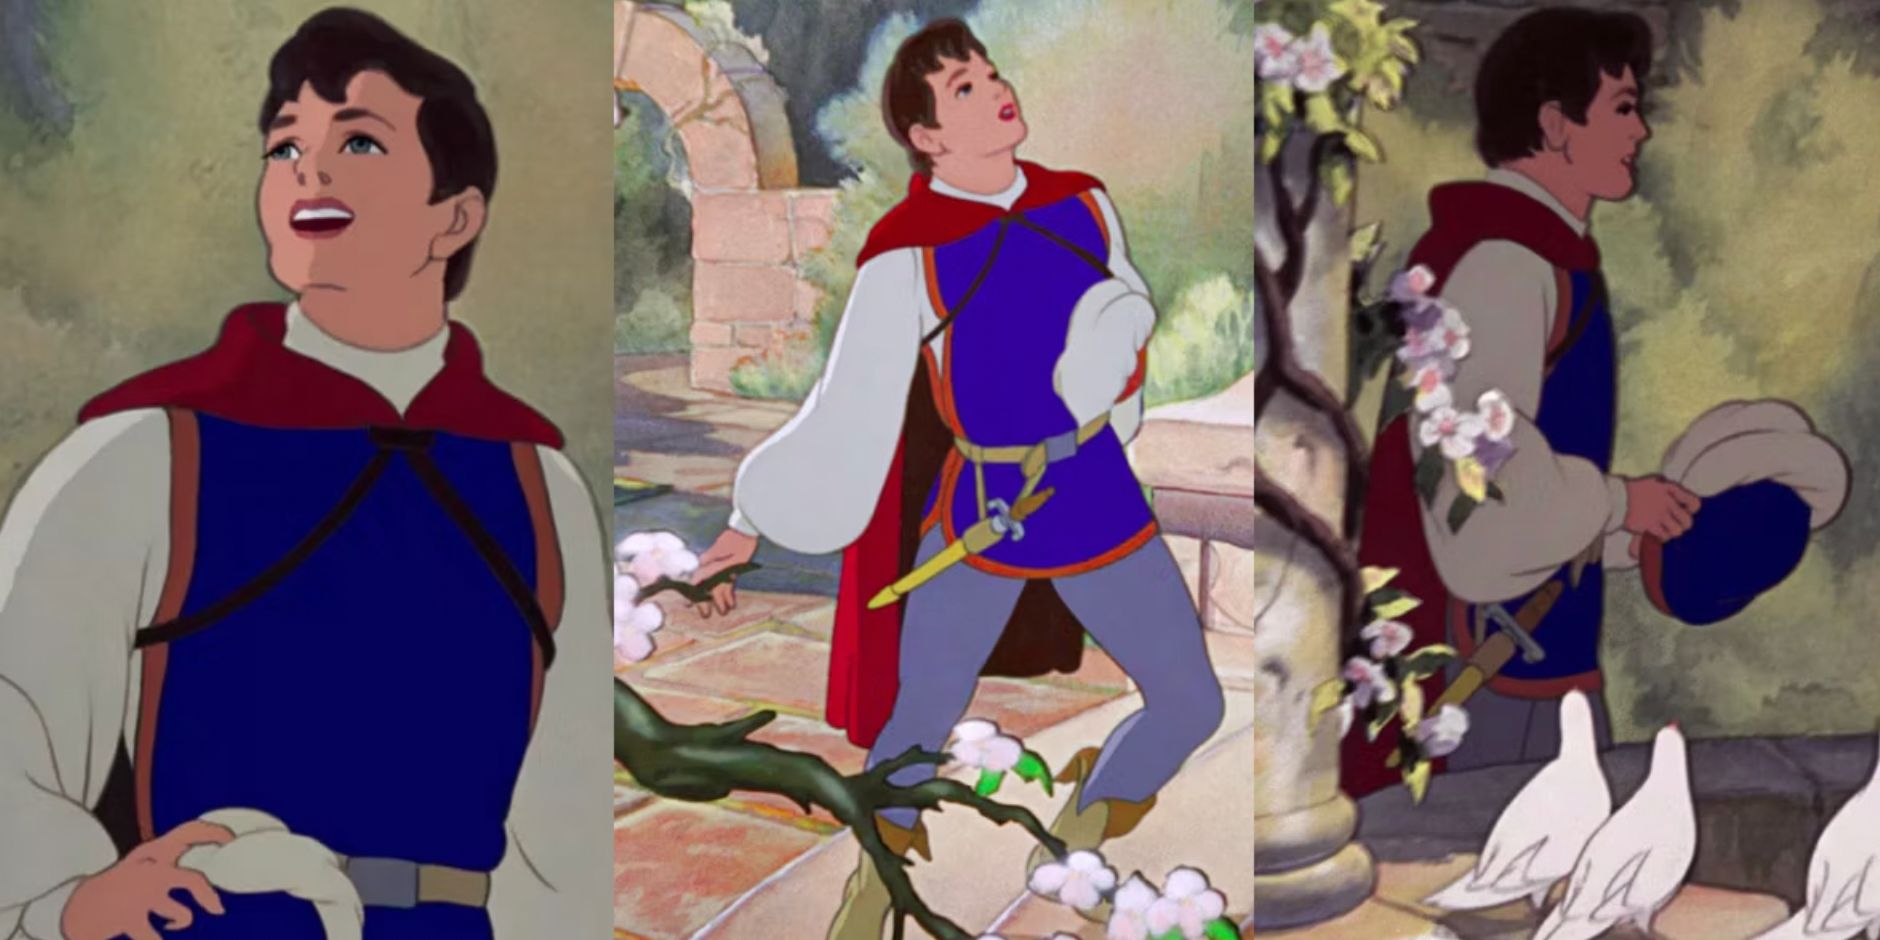 Side by side images feature three angles of Prince Florian in Snow White